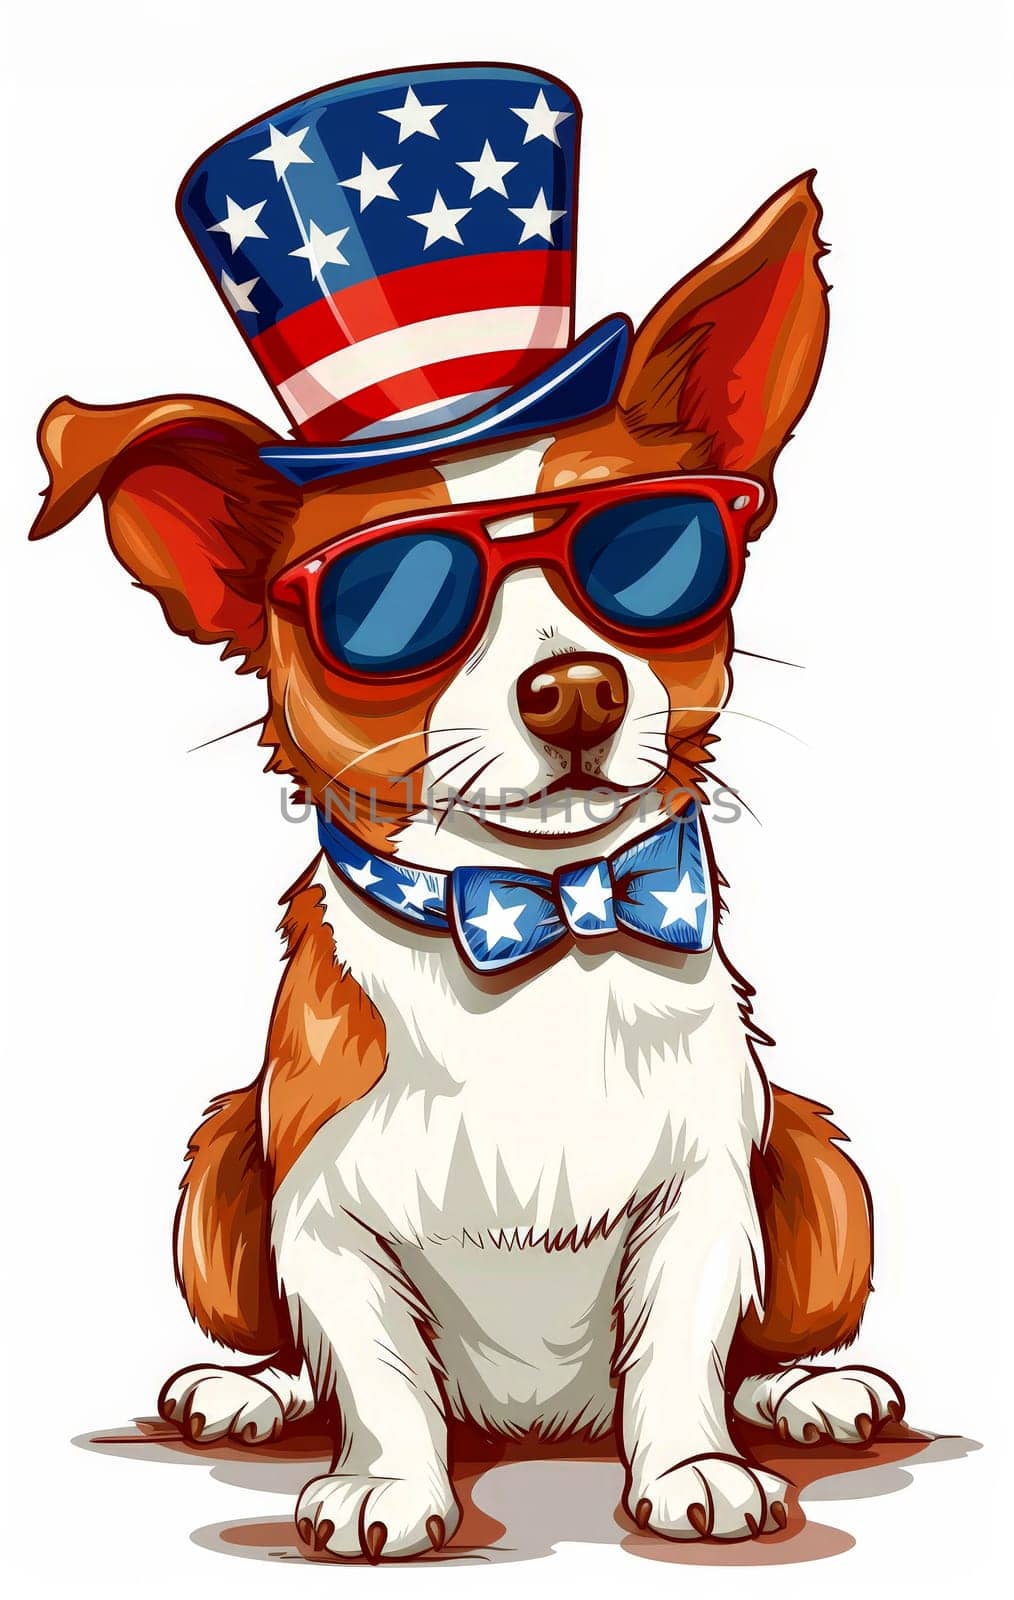 A Russell dog wearing a USA top hat and sunglasses. independence day concept by matamnad